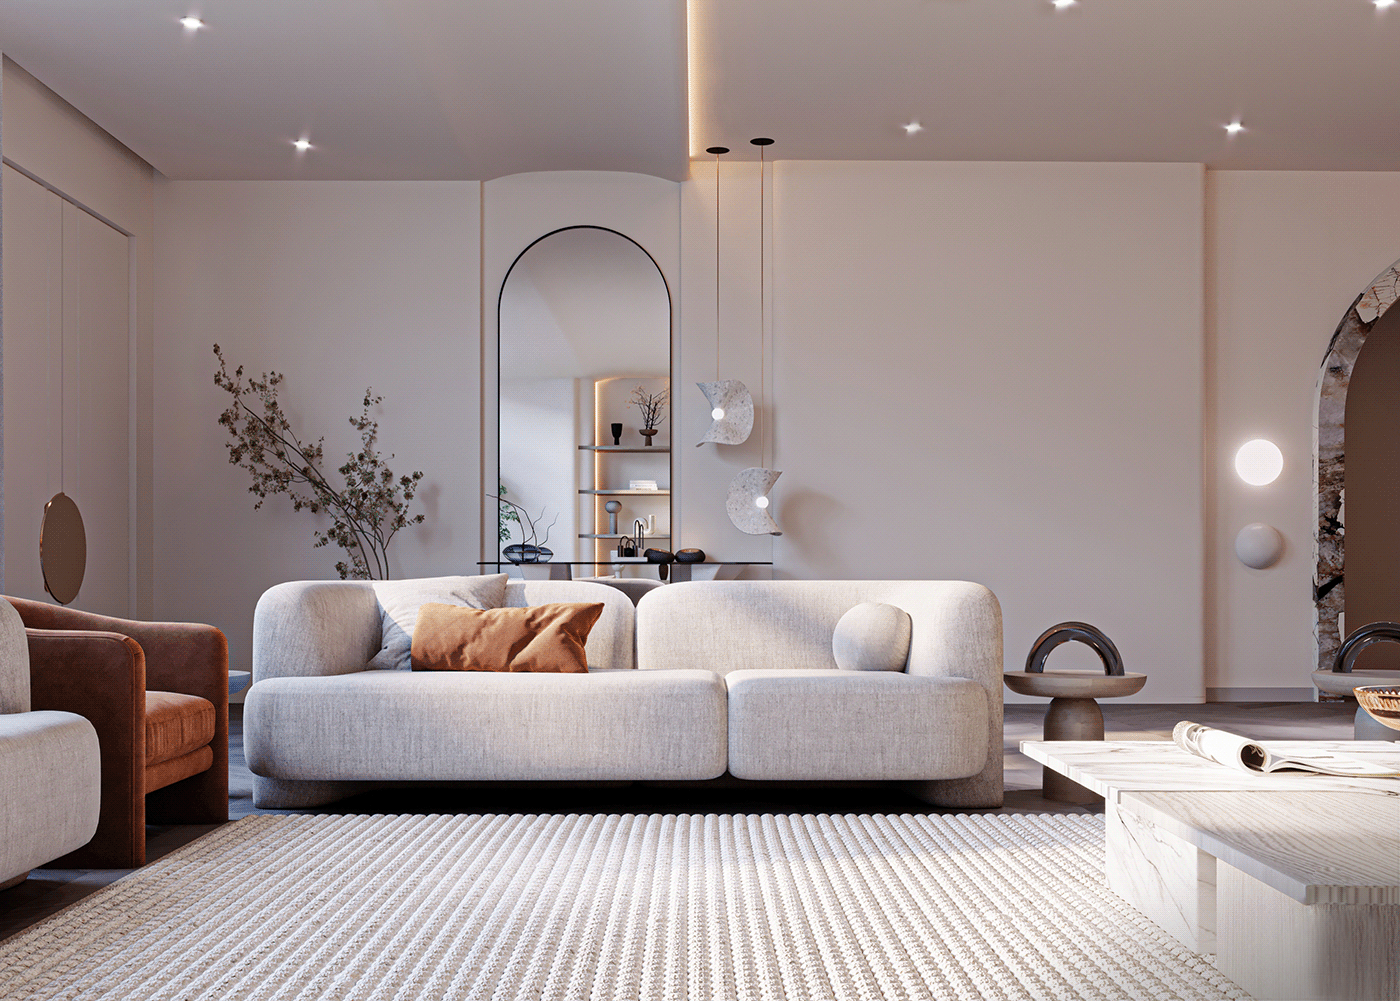 Powerful Neutral Interiors With Invigorating Accents